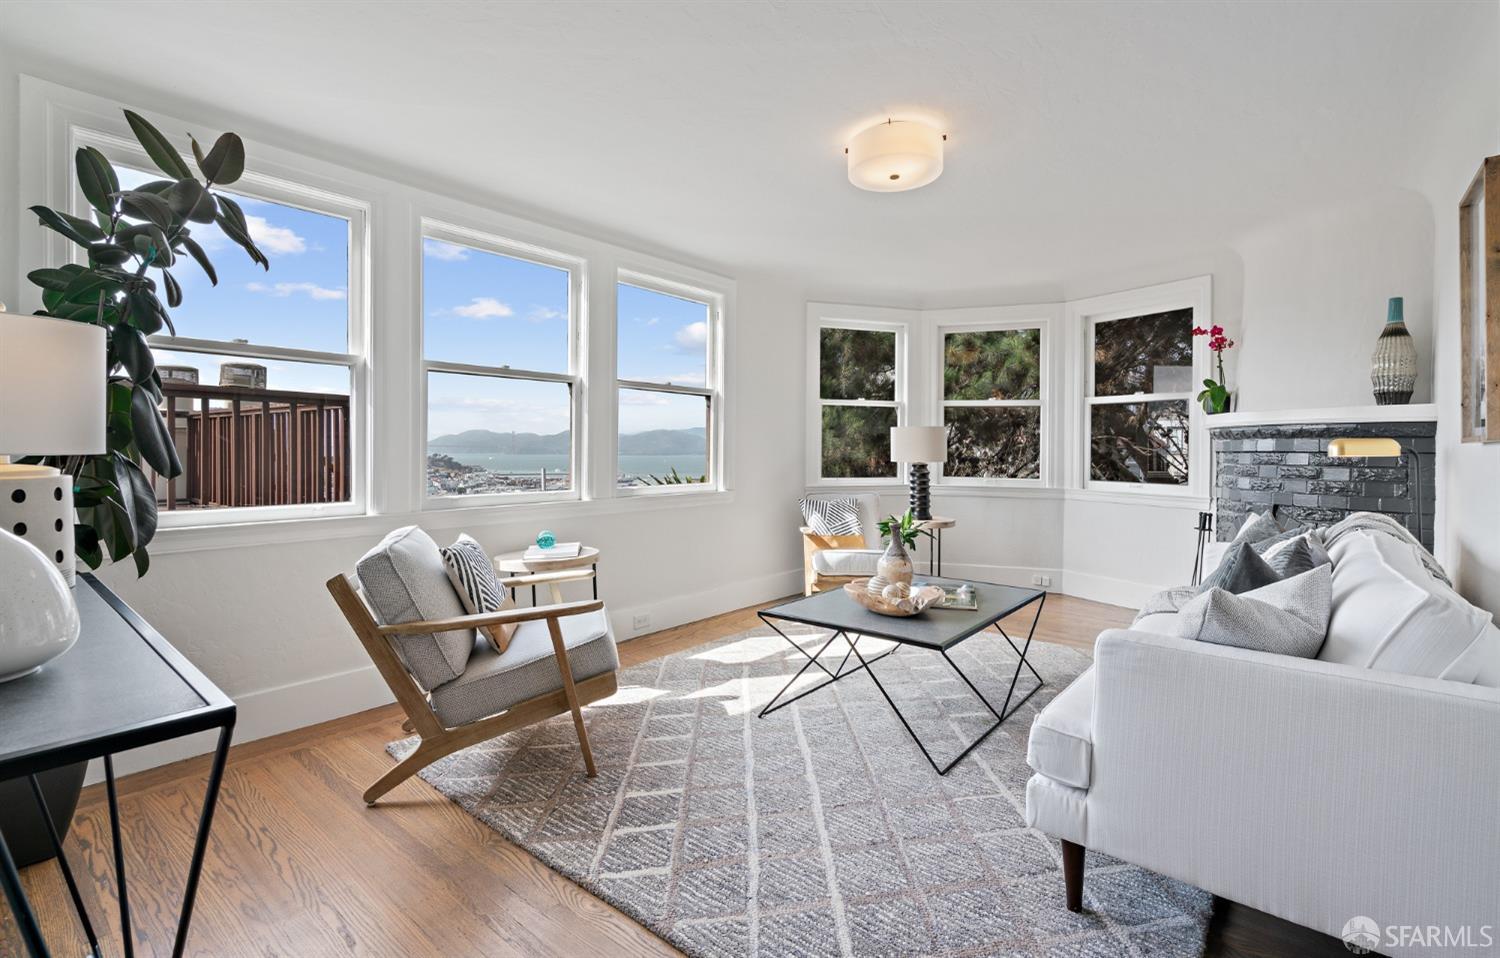 First time for sale! This 110 year-old San Francisco treasure was originally commissioned by the Pezzi family in 1913. 407-411 Greenwich offers a rare opportunity to own a 3rd generation same family legacy at the top of Greenwich steps! Perfectly adjacent to Pioneer Park and Coit Tower, this masterfully constructed 5-unit building offers an updated vacant 1 bedroom penthouse with a 400sqft panoramic view roof deck. Income from 4 additional 2-bedroom flats with split bathroom, ADU potential, plus an unbeatable location.  Detached on 3 sides, this property provides spectacular city, Bay and garden views from each unit. Easy to rent makes this property the perfect investment!